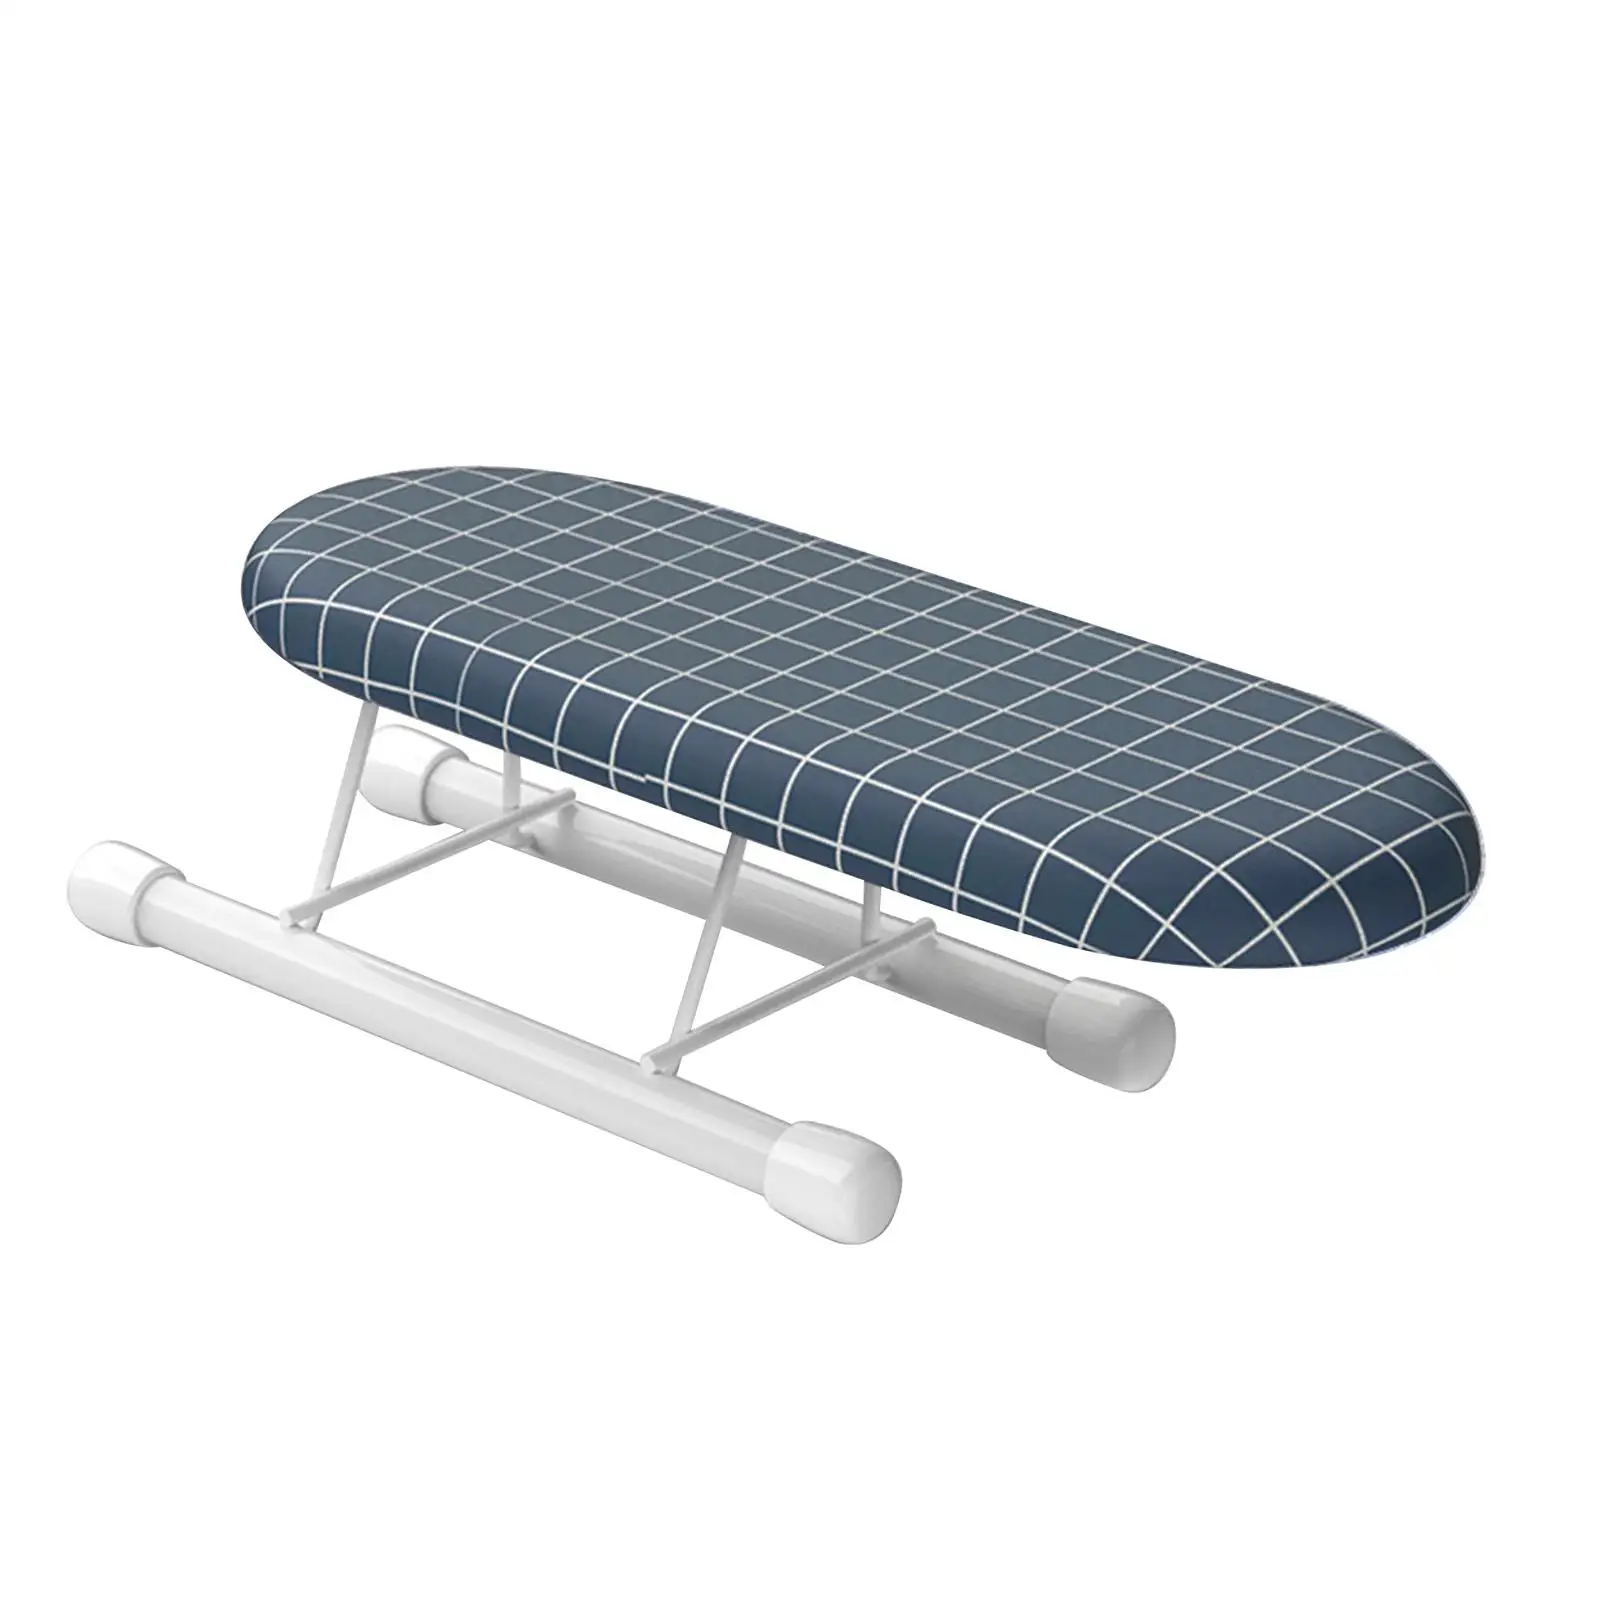 Small Folding Ironing Board, Removable Cover, Ironing Cuffs Neckline for Apartments, Home, Travel